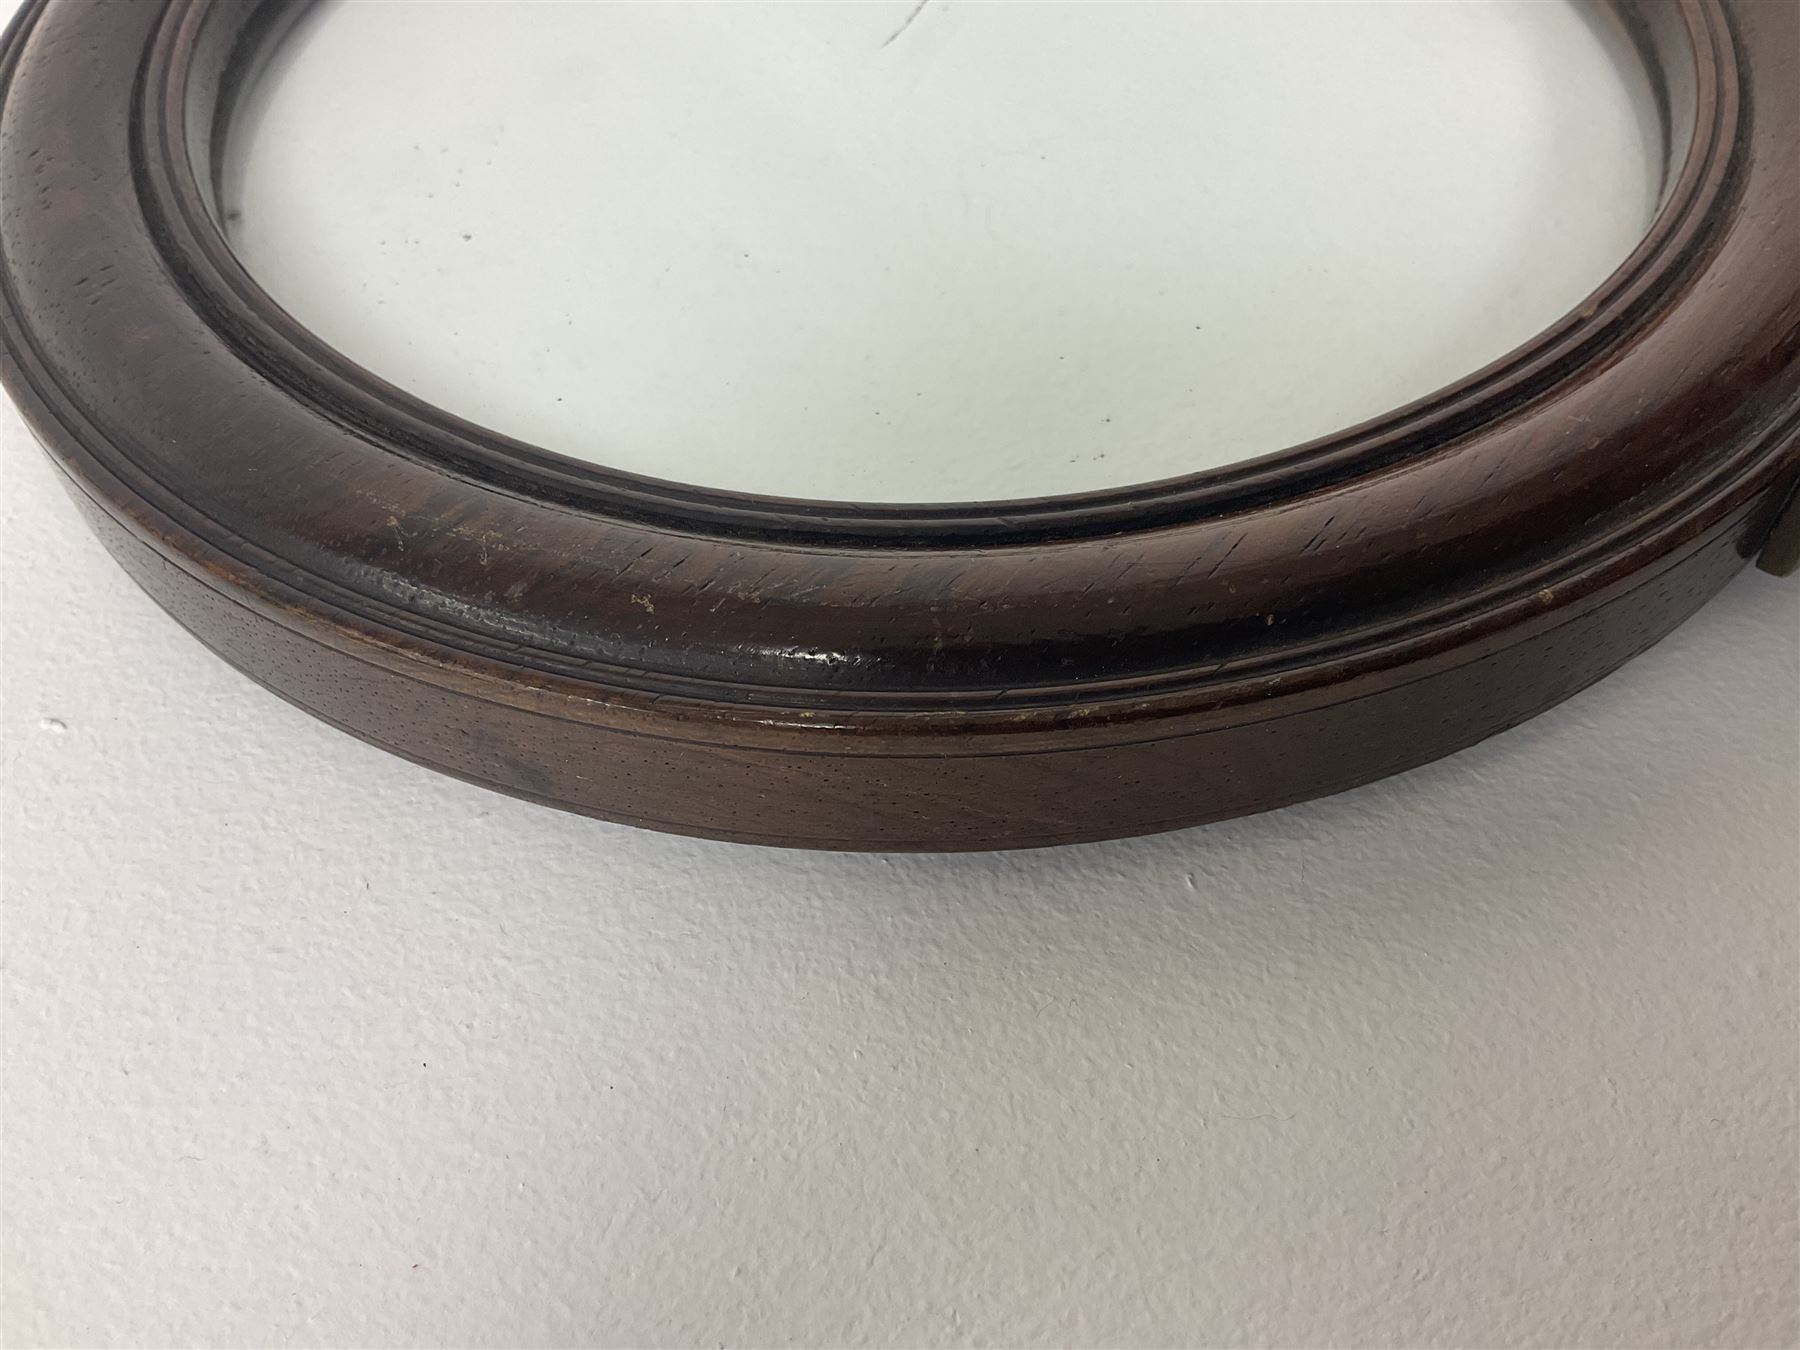 Large late 19th century rosewood library or gallery magnifying glass - Image 5 of 11